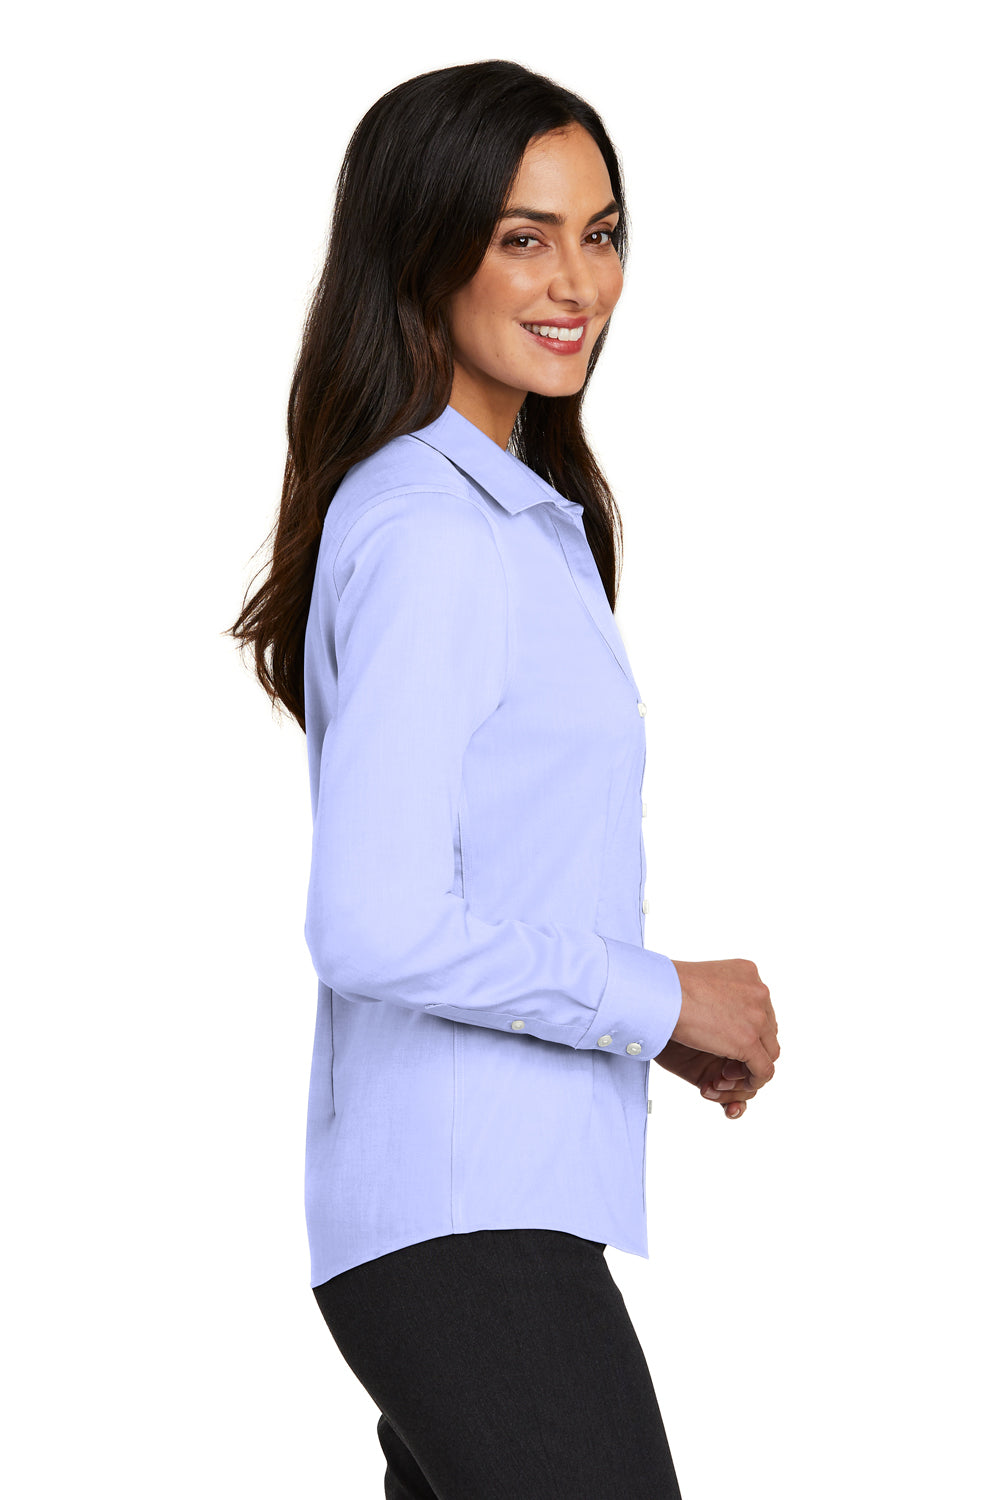 Red House RH250 Womens Pinpoint Oxford Wrinkle Resistant Long Sleeve Button Down Shirt Blue Side